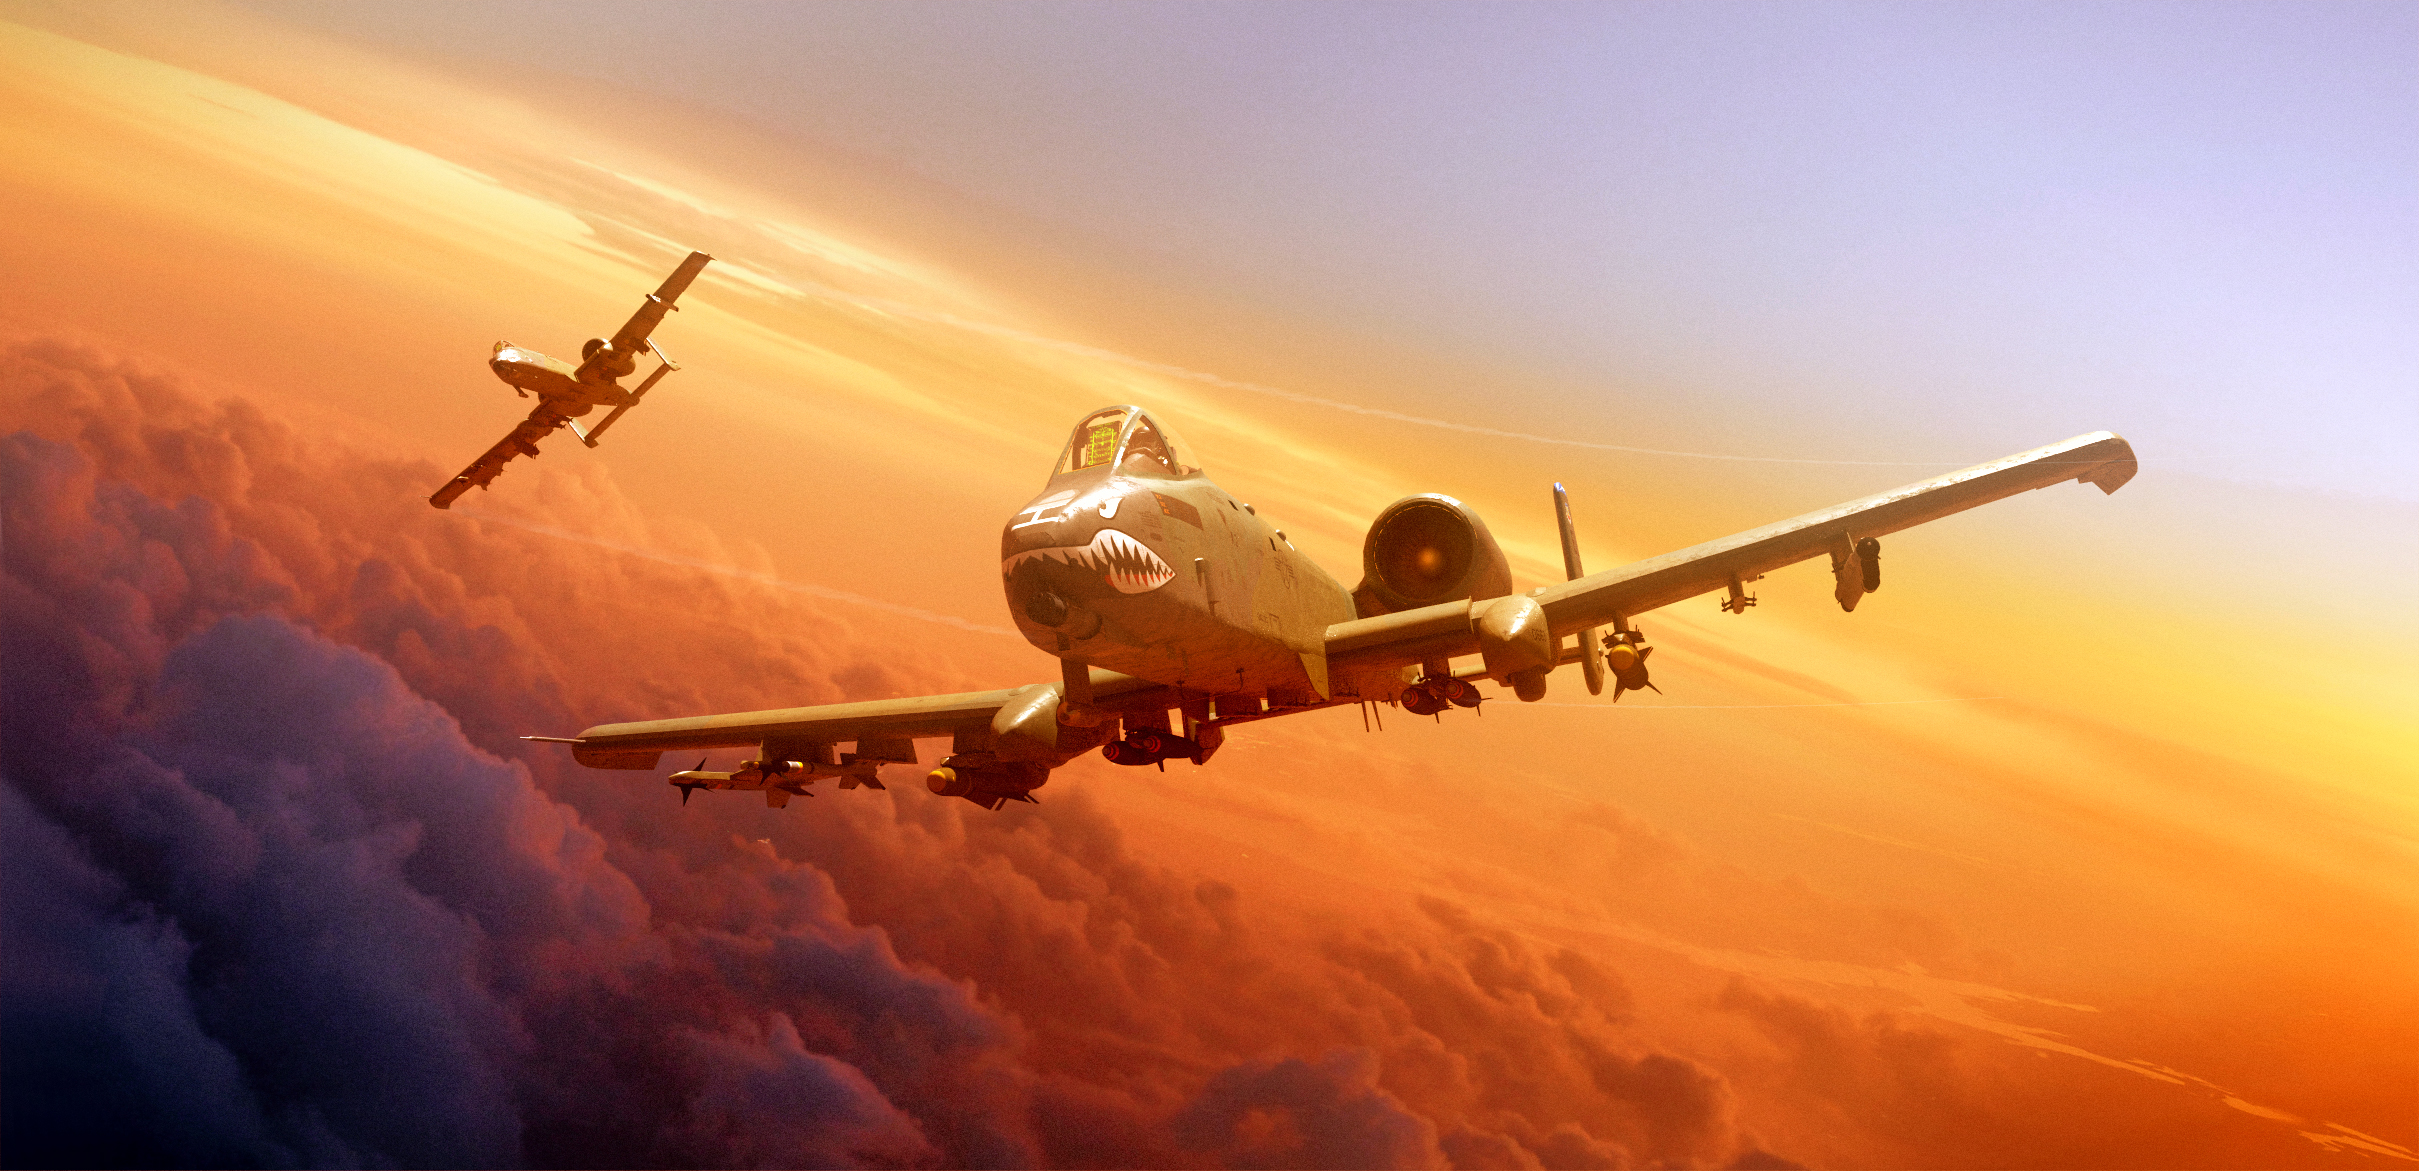 Wallpapers aircraft planes sky on the desktop